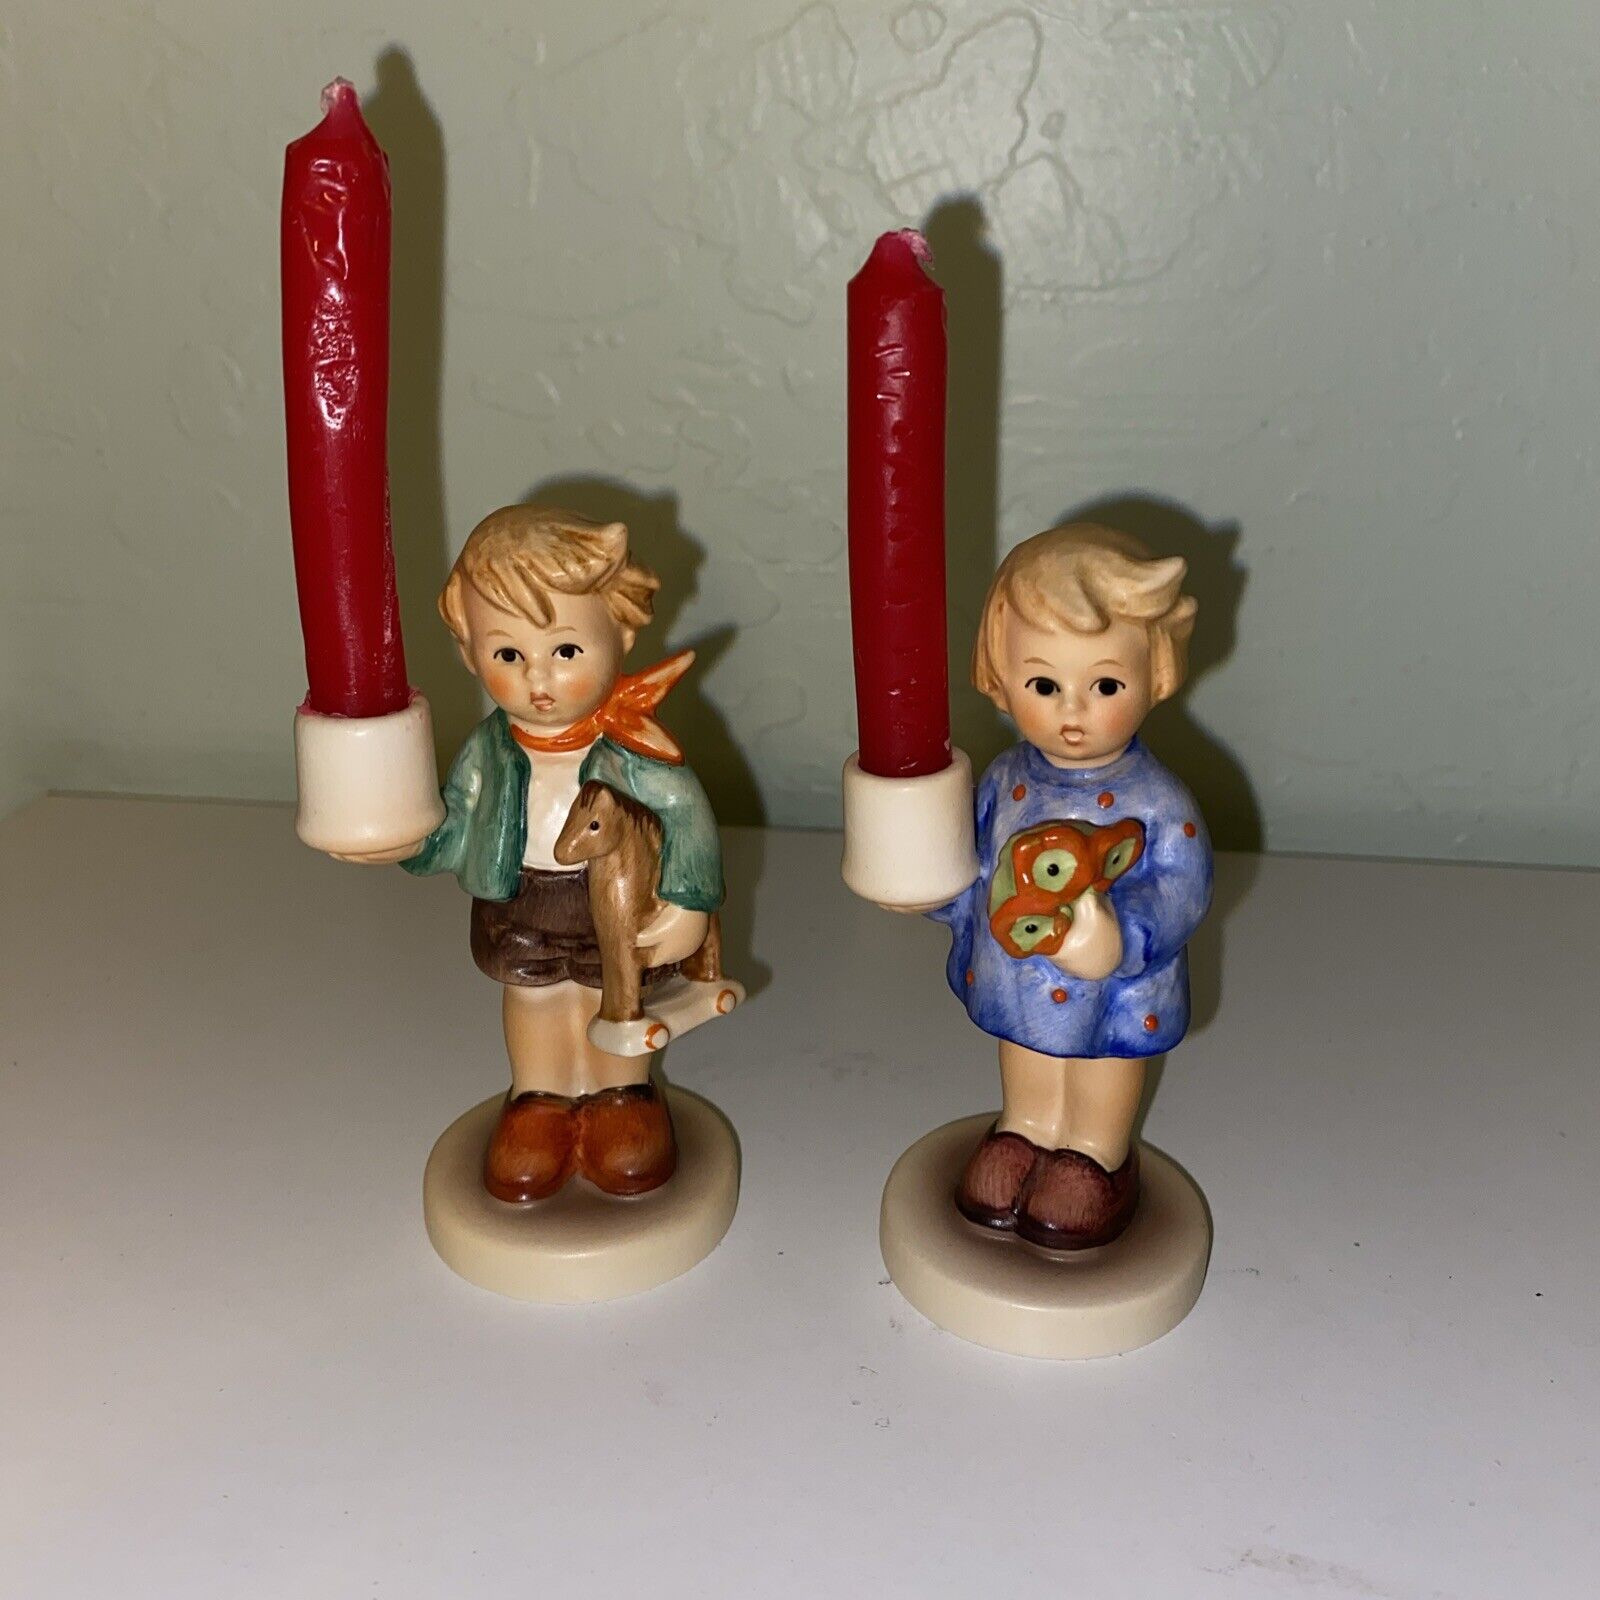 Pair of Vintage Hummel Christmas Advent Candle Holder Figurines #115 and #117